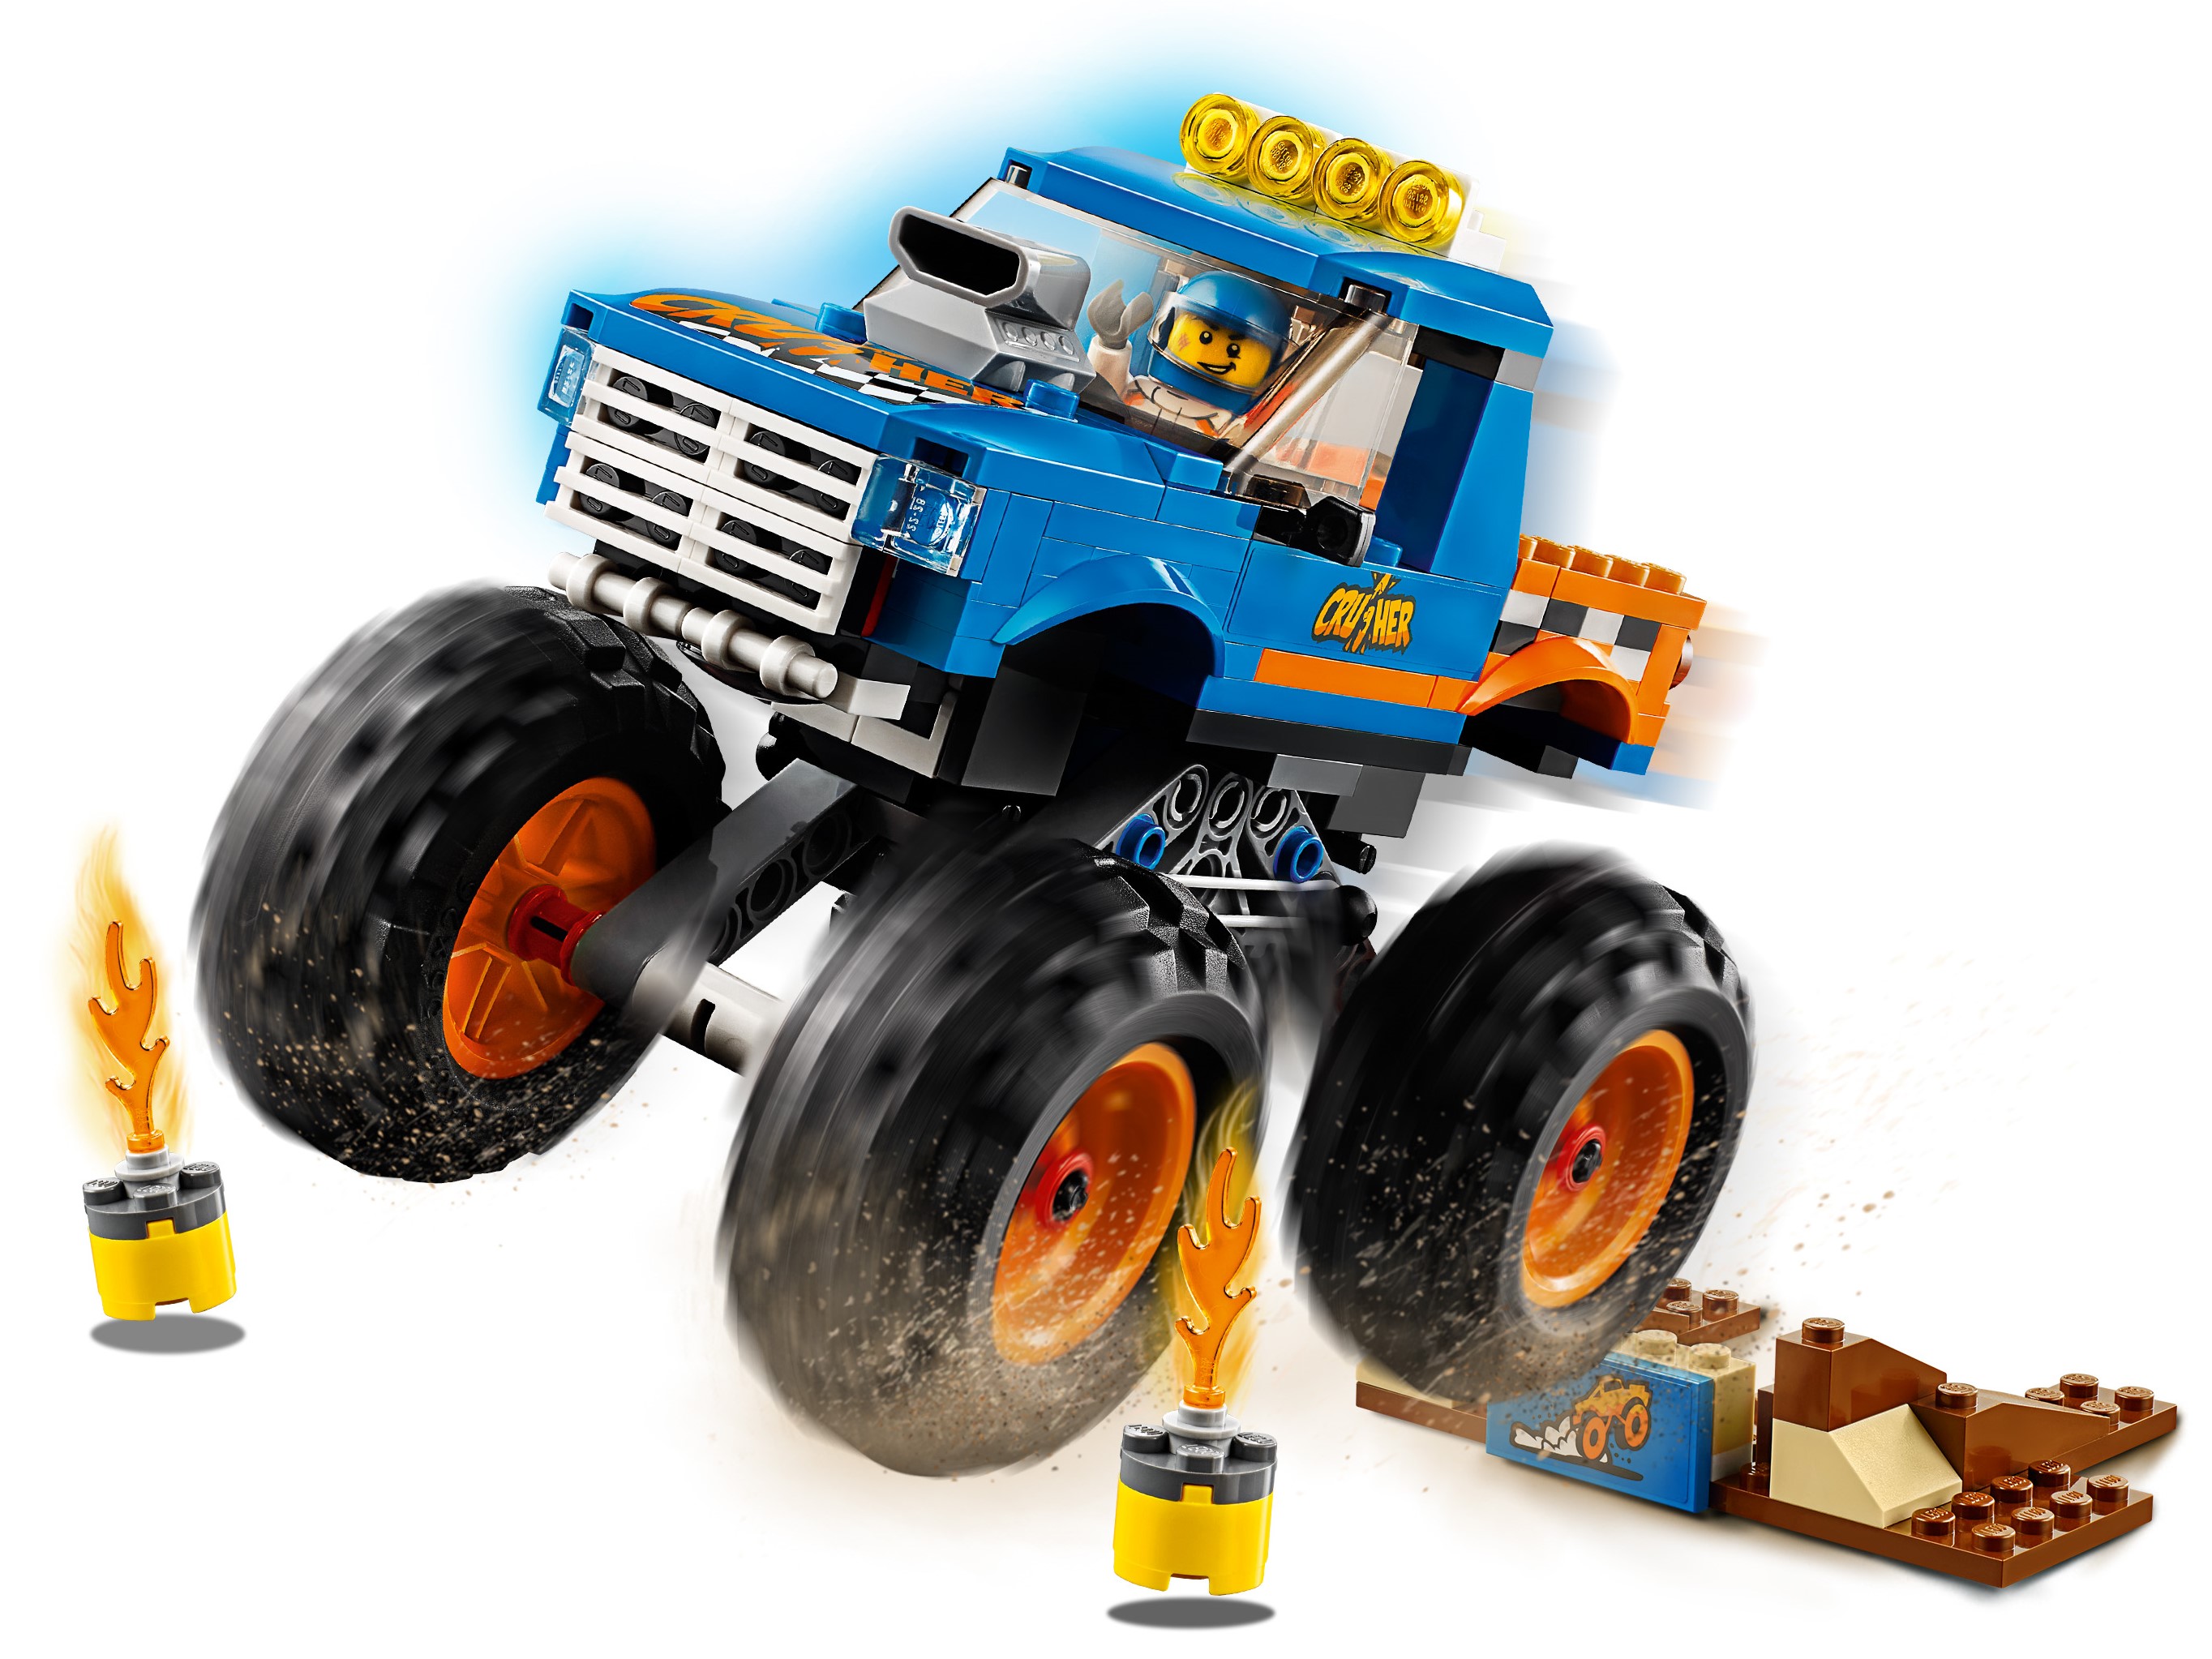 Truck 60180 | City | online at the LEGO® US